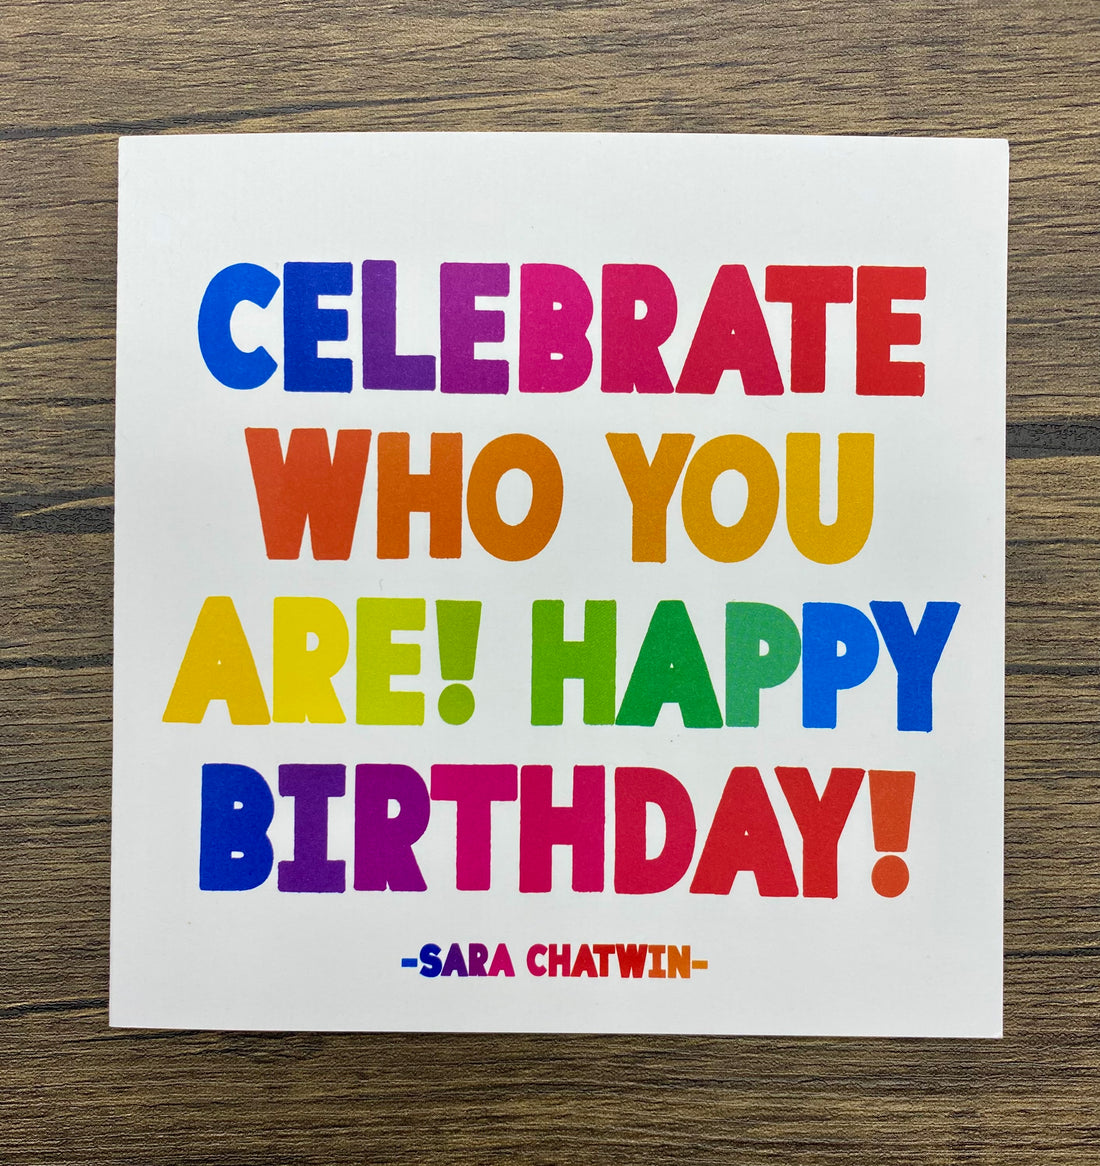 Quotable Card: Celebrate who you are!